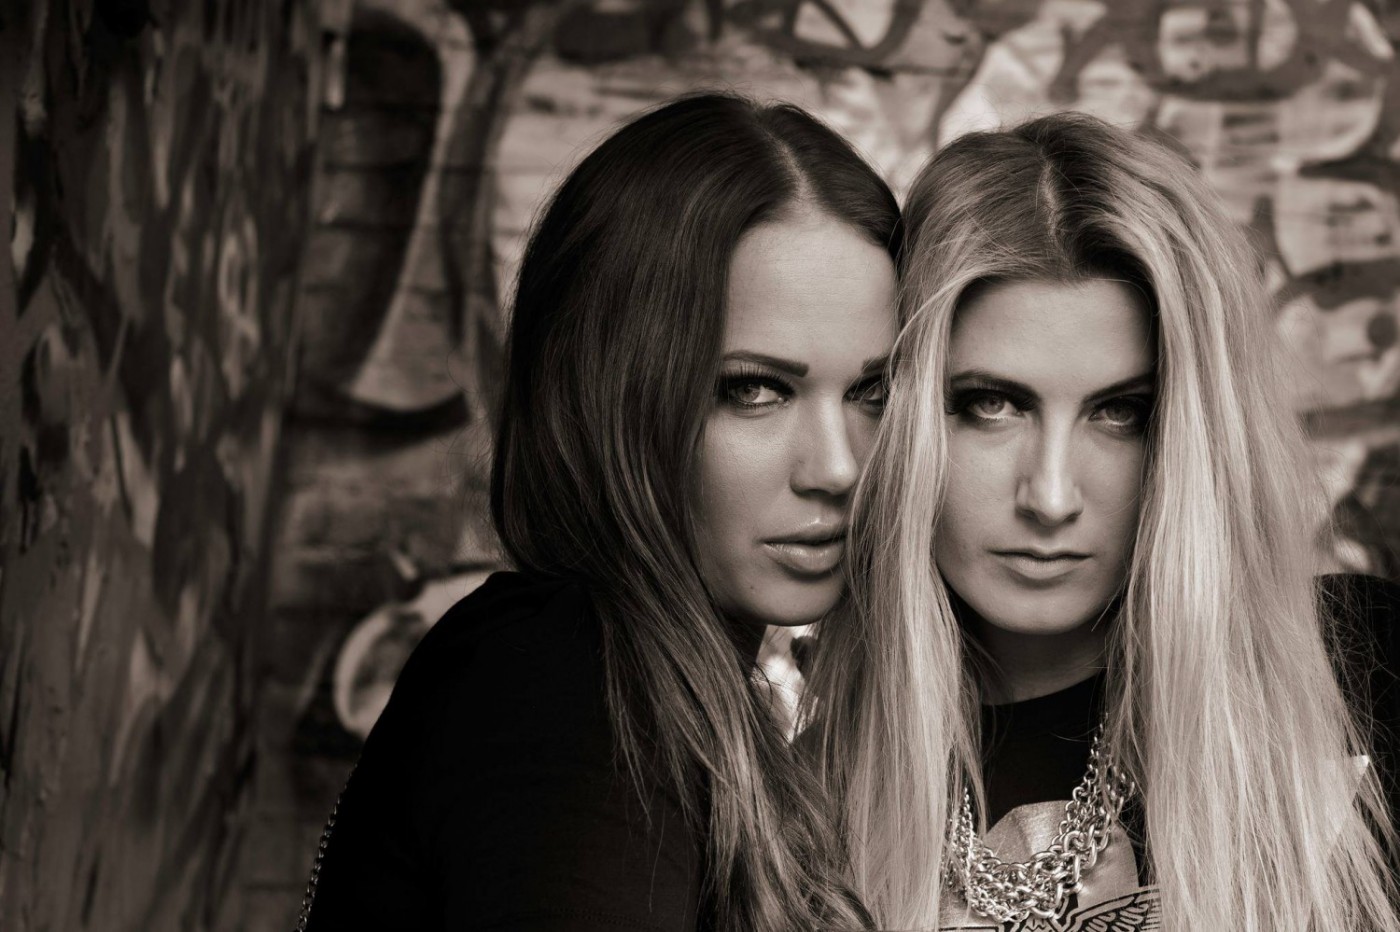 Meet Sweden's Newest Electronic Duo: Tjuva